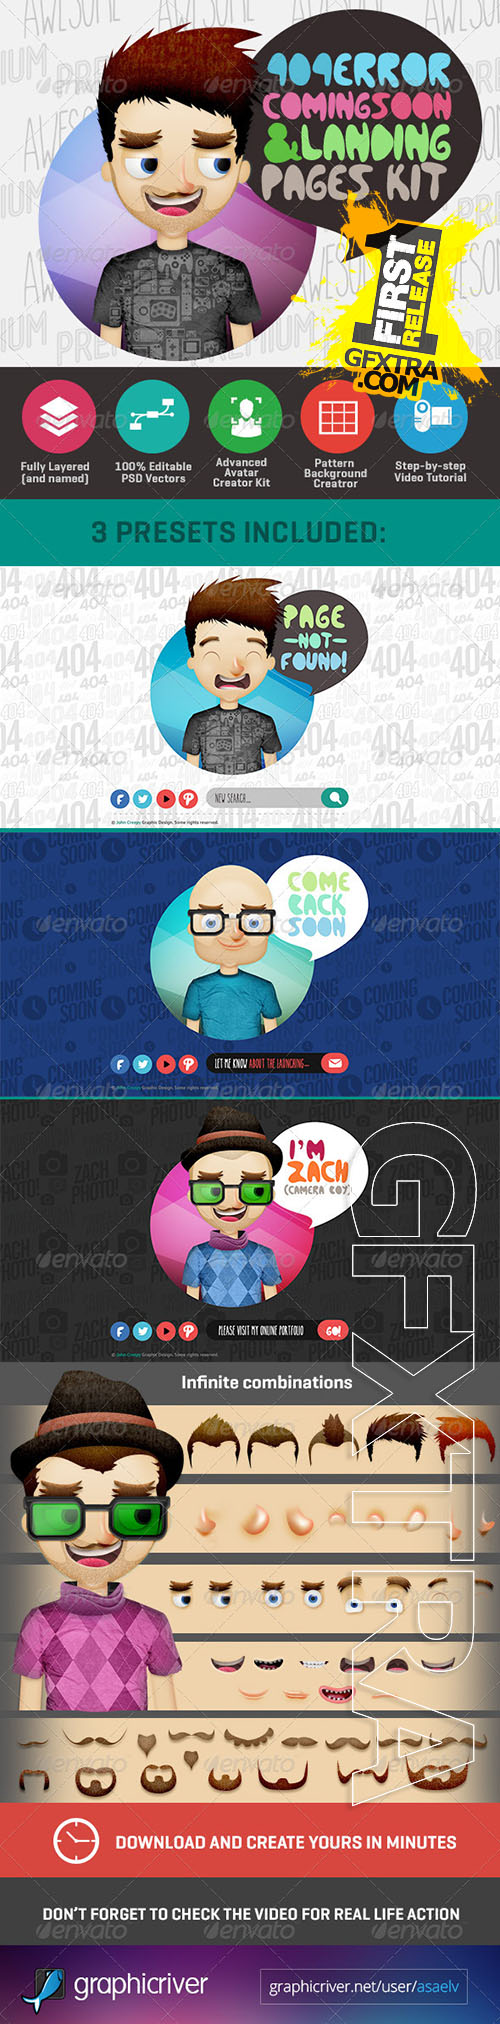 Graphicriver - 404 Page with Avatar Creator Kit 6853253